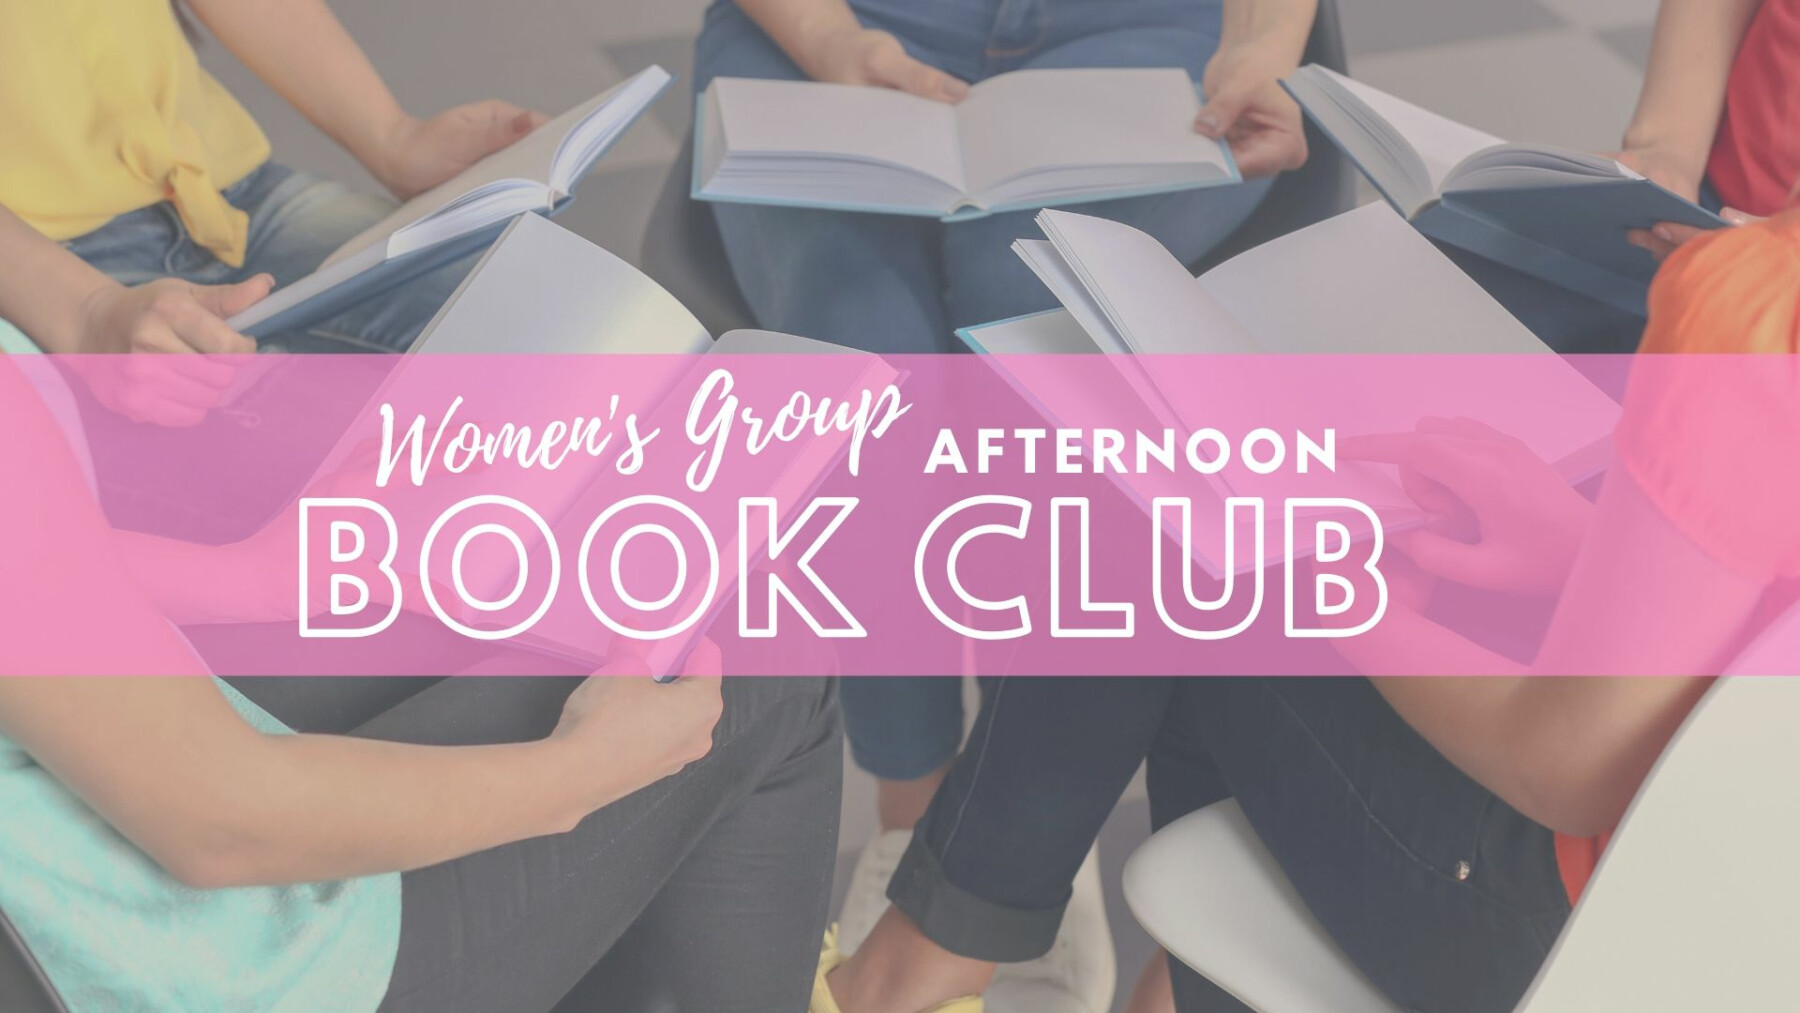 Women's Group Afternoon Book Club